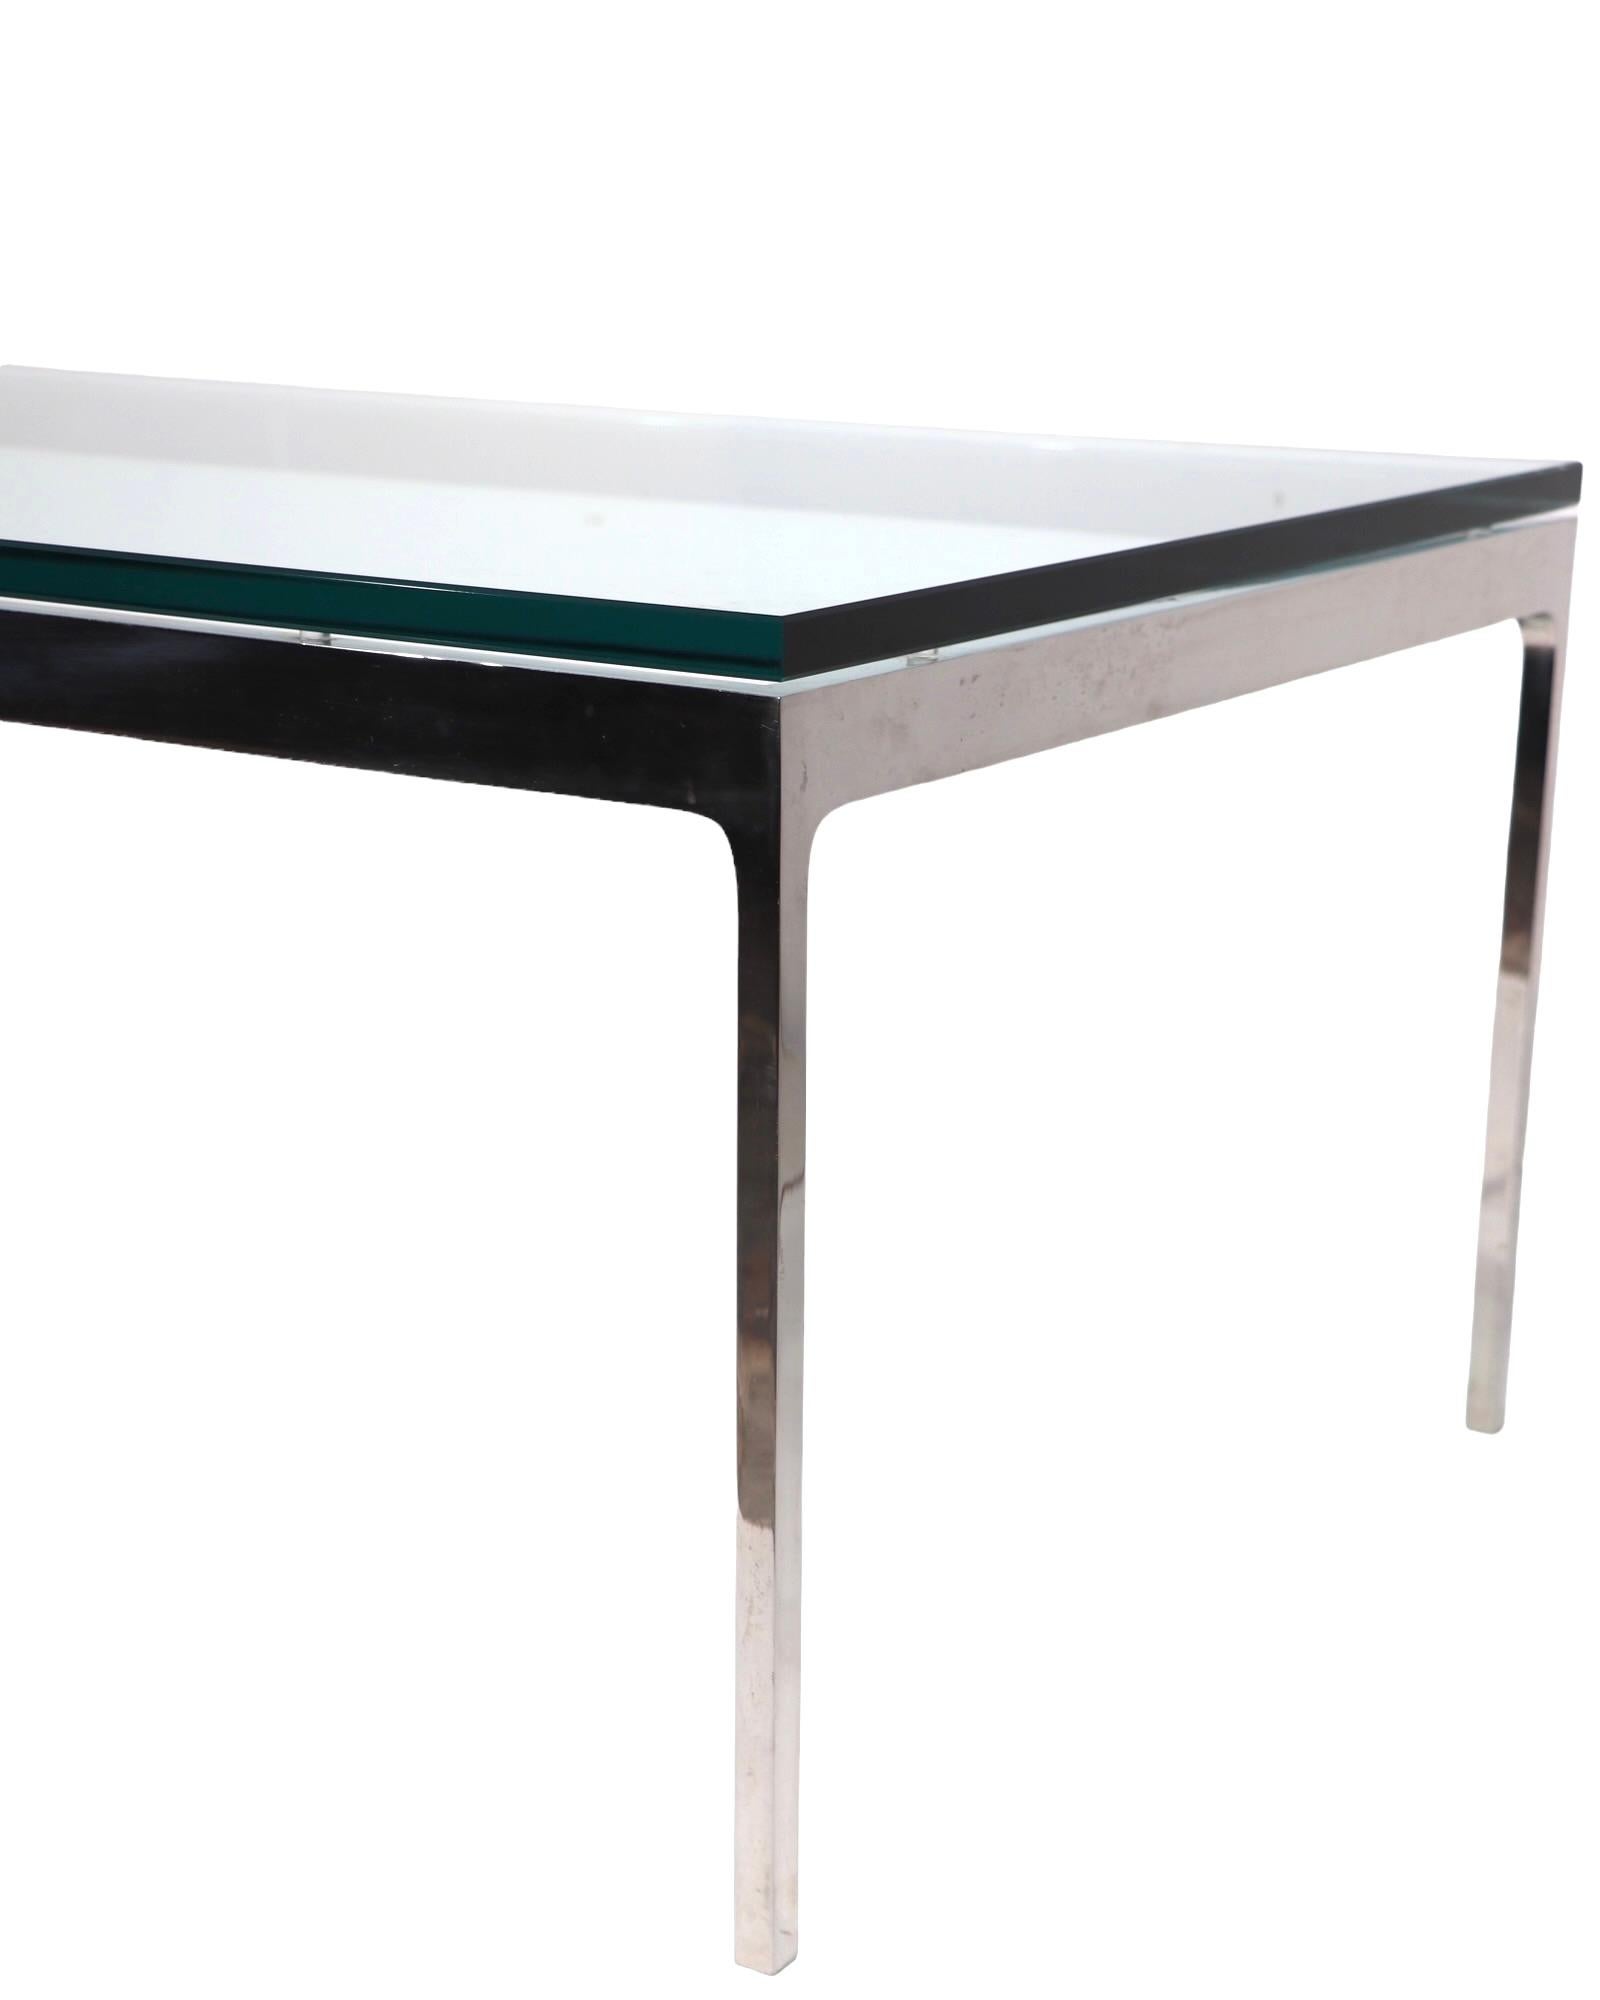 International Style Chrome and Glass Coffee Table by Zographos c 1970's  For Sale 10